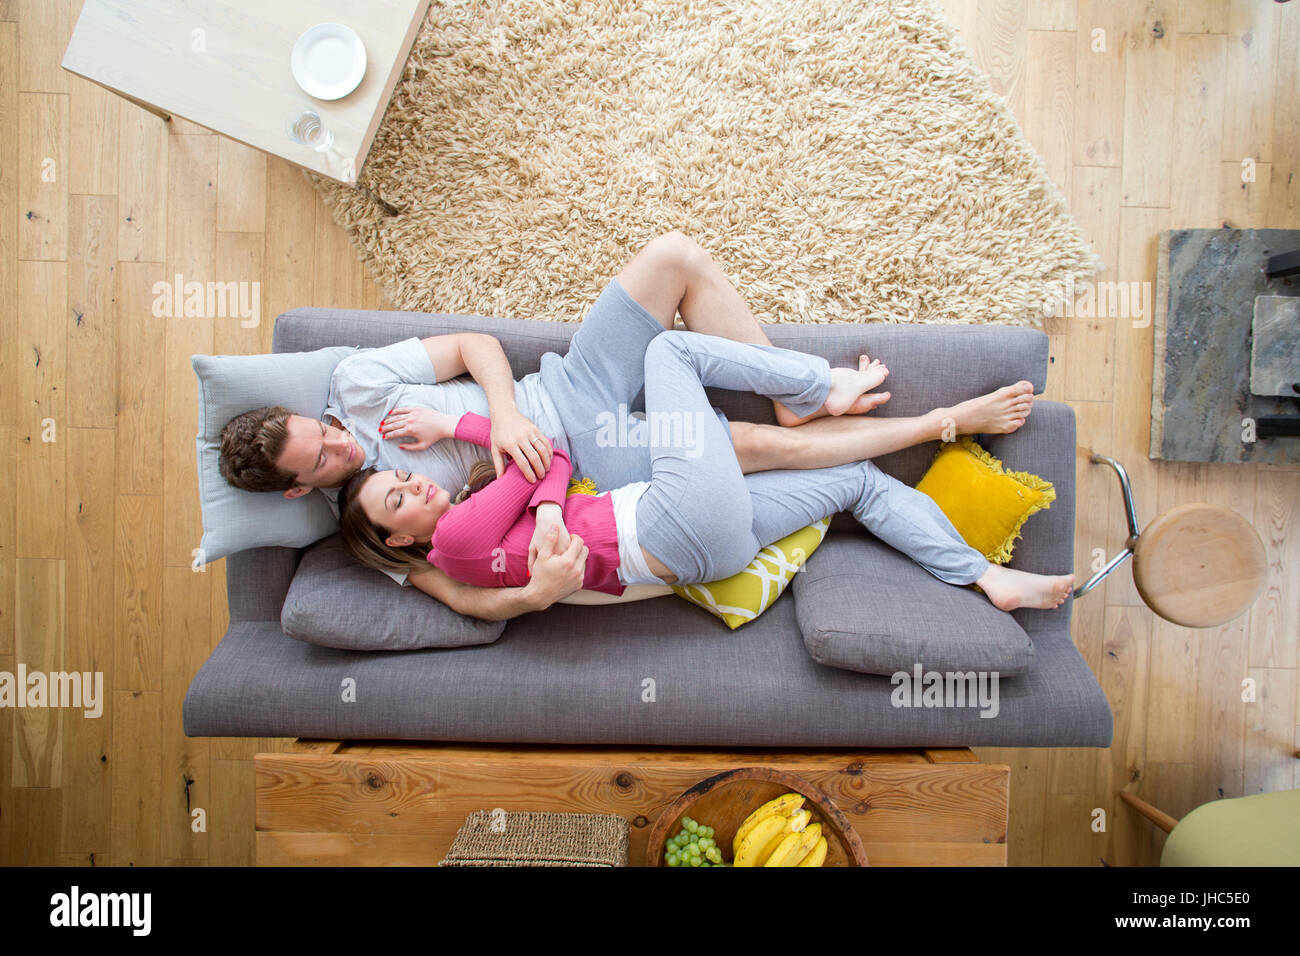 Mid adult couple are cuddled up together on the sofa while they nap. Stock Photo